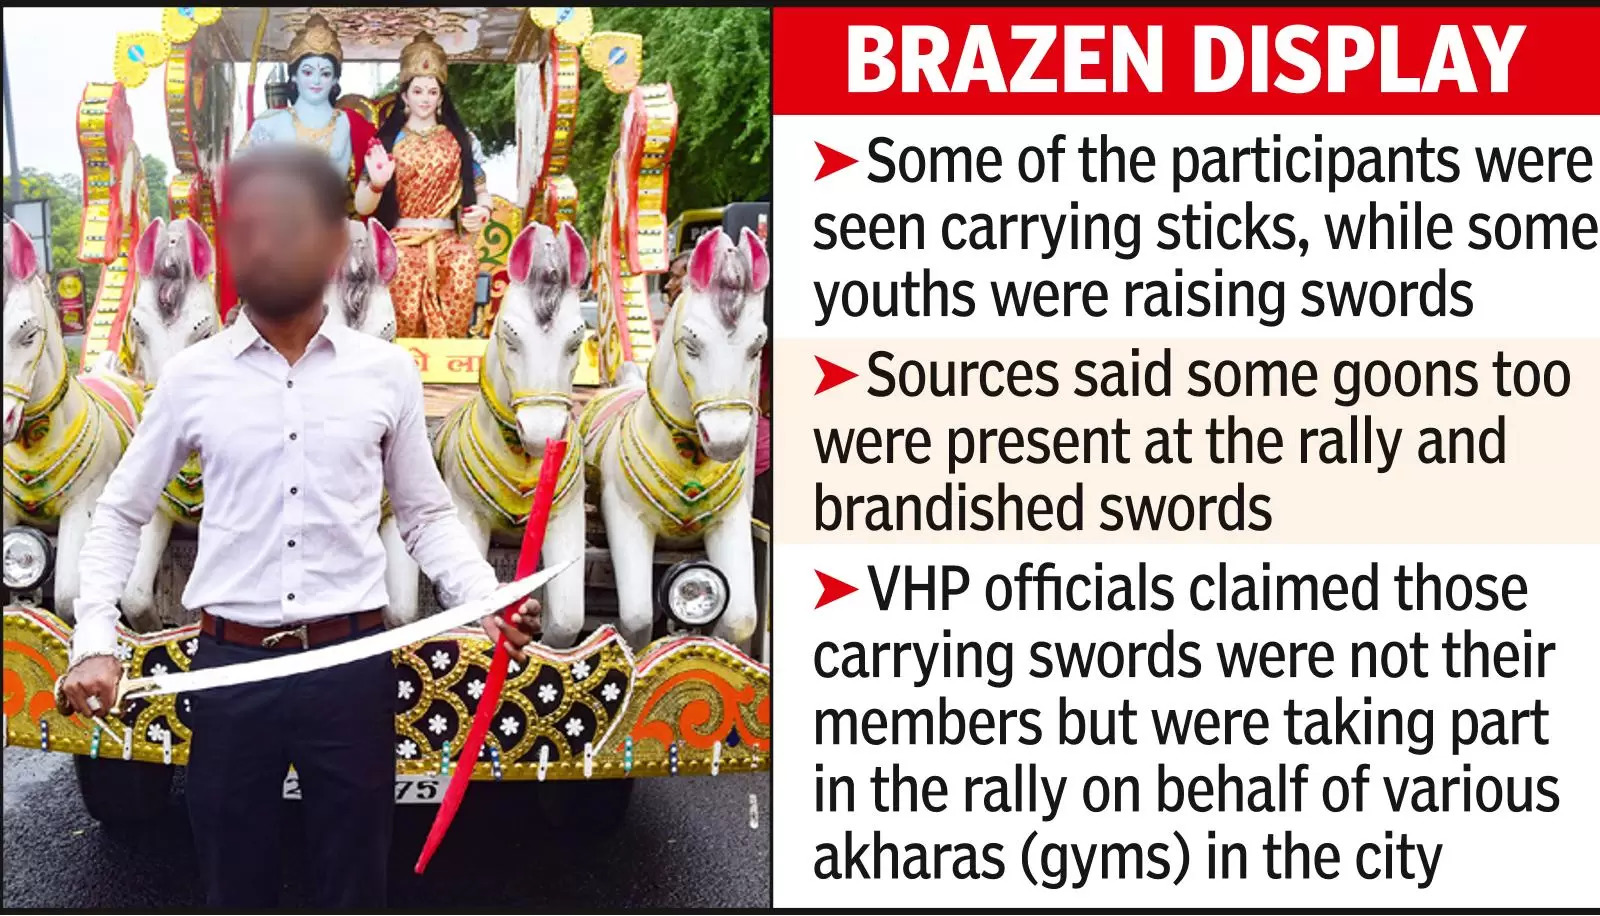 Youngsters brandish swords at VHP rally, cops ‘looking into it’